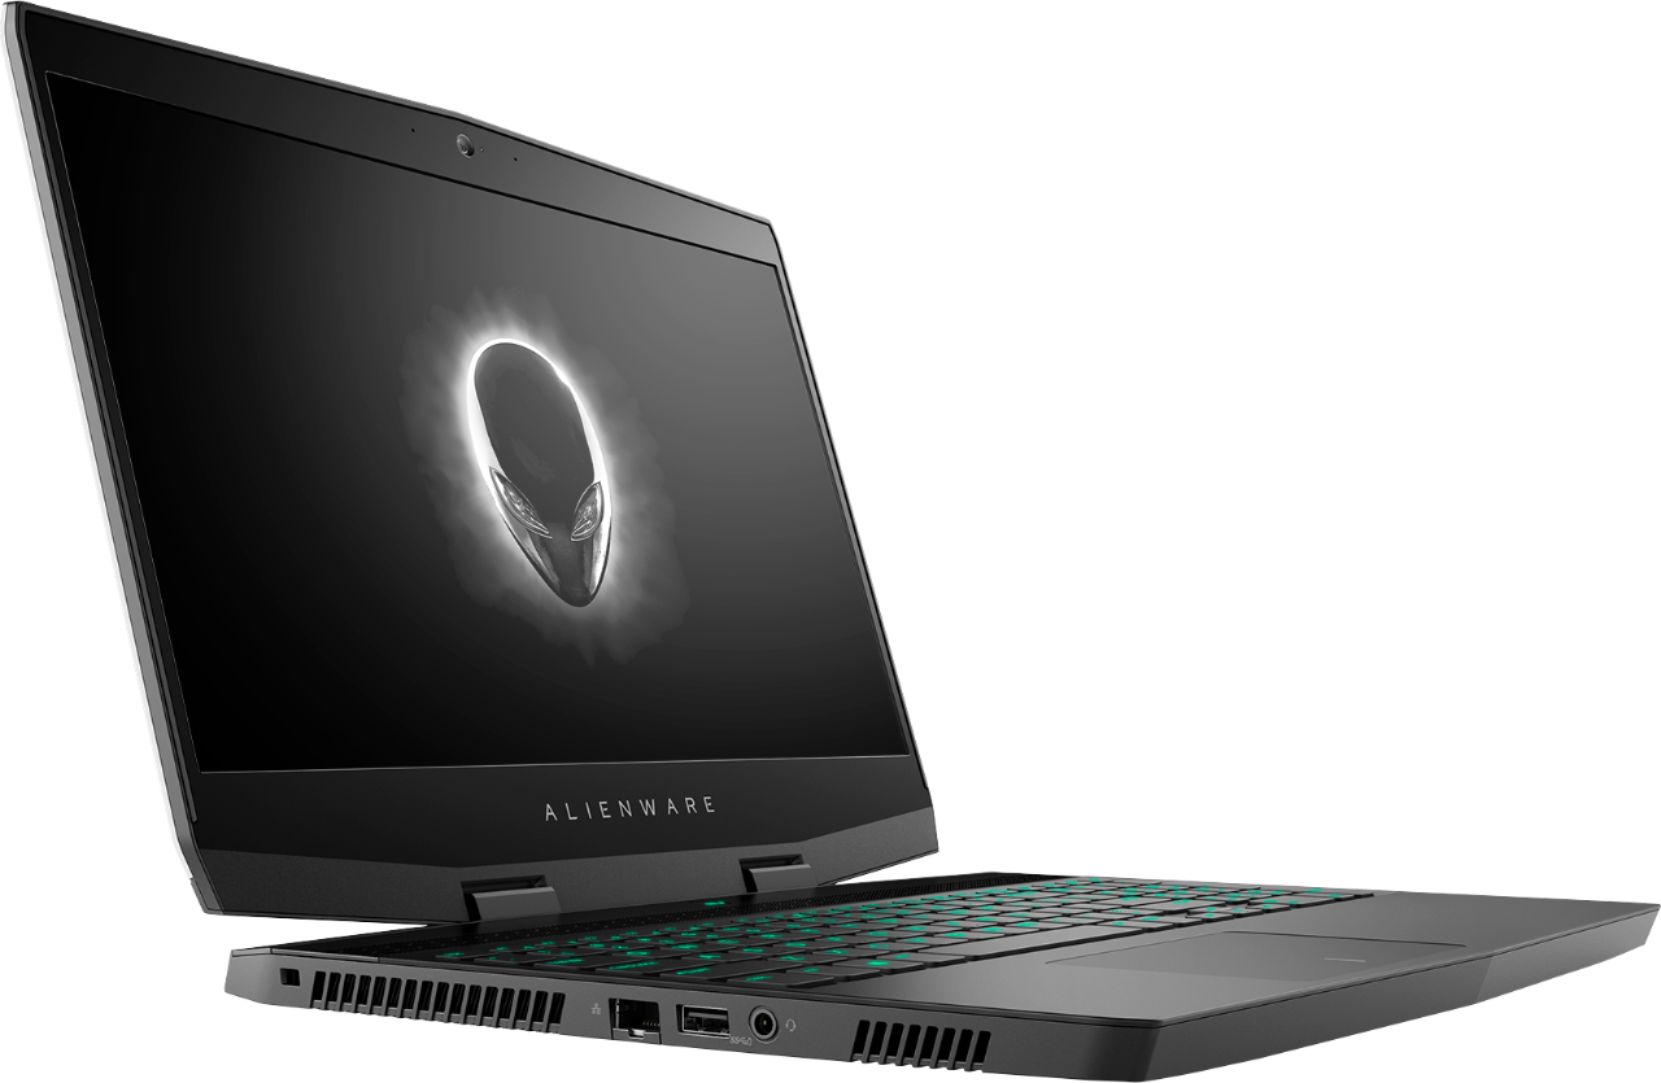 Angle View: Alienware - Geek Squad Certified Refurbished 15.6" Laptop - Intel Core i7 - 16GB Memory - NVIDIA GeForce GTX 1060 - 1TB HD+128GB SSD - Silver